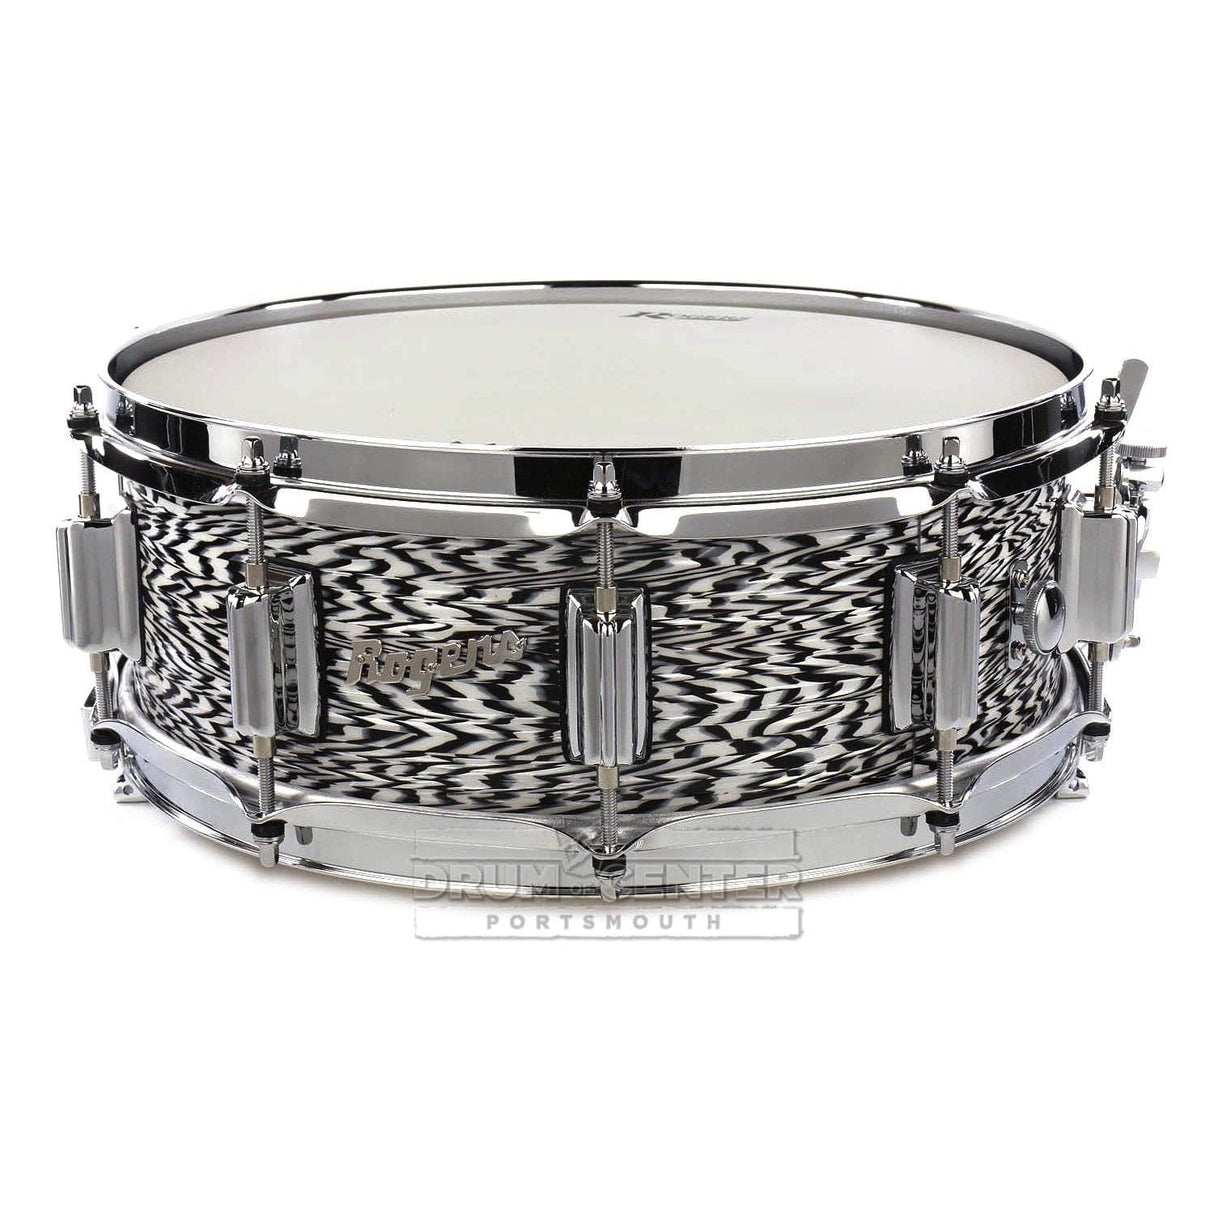 Rogers Dyna-sonic Wood Shell Snare Drum 14x5 White Onyx